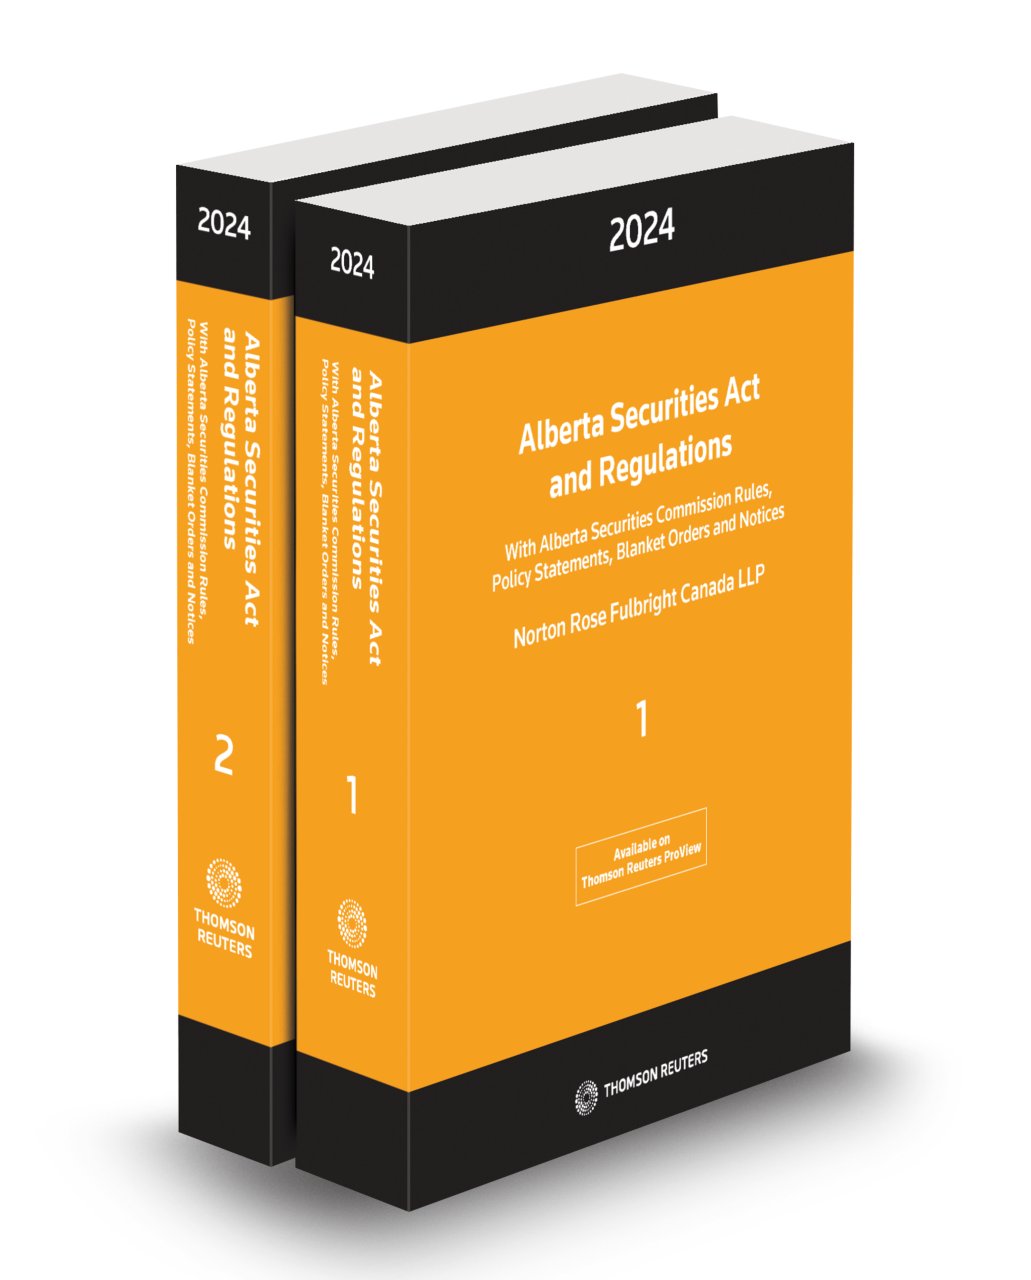 Cover of Alberta Securities Act and Regulations 2024 + CD